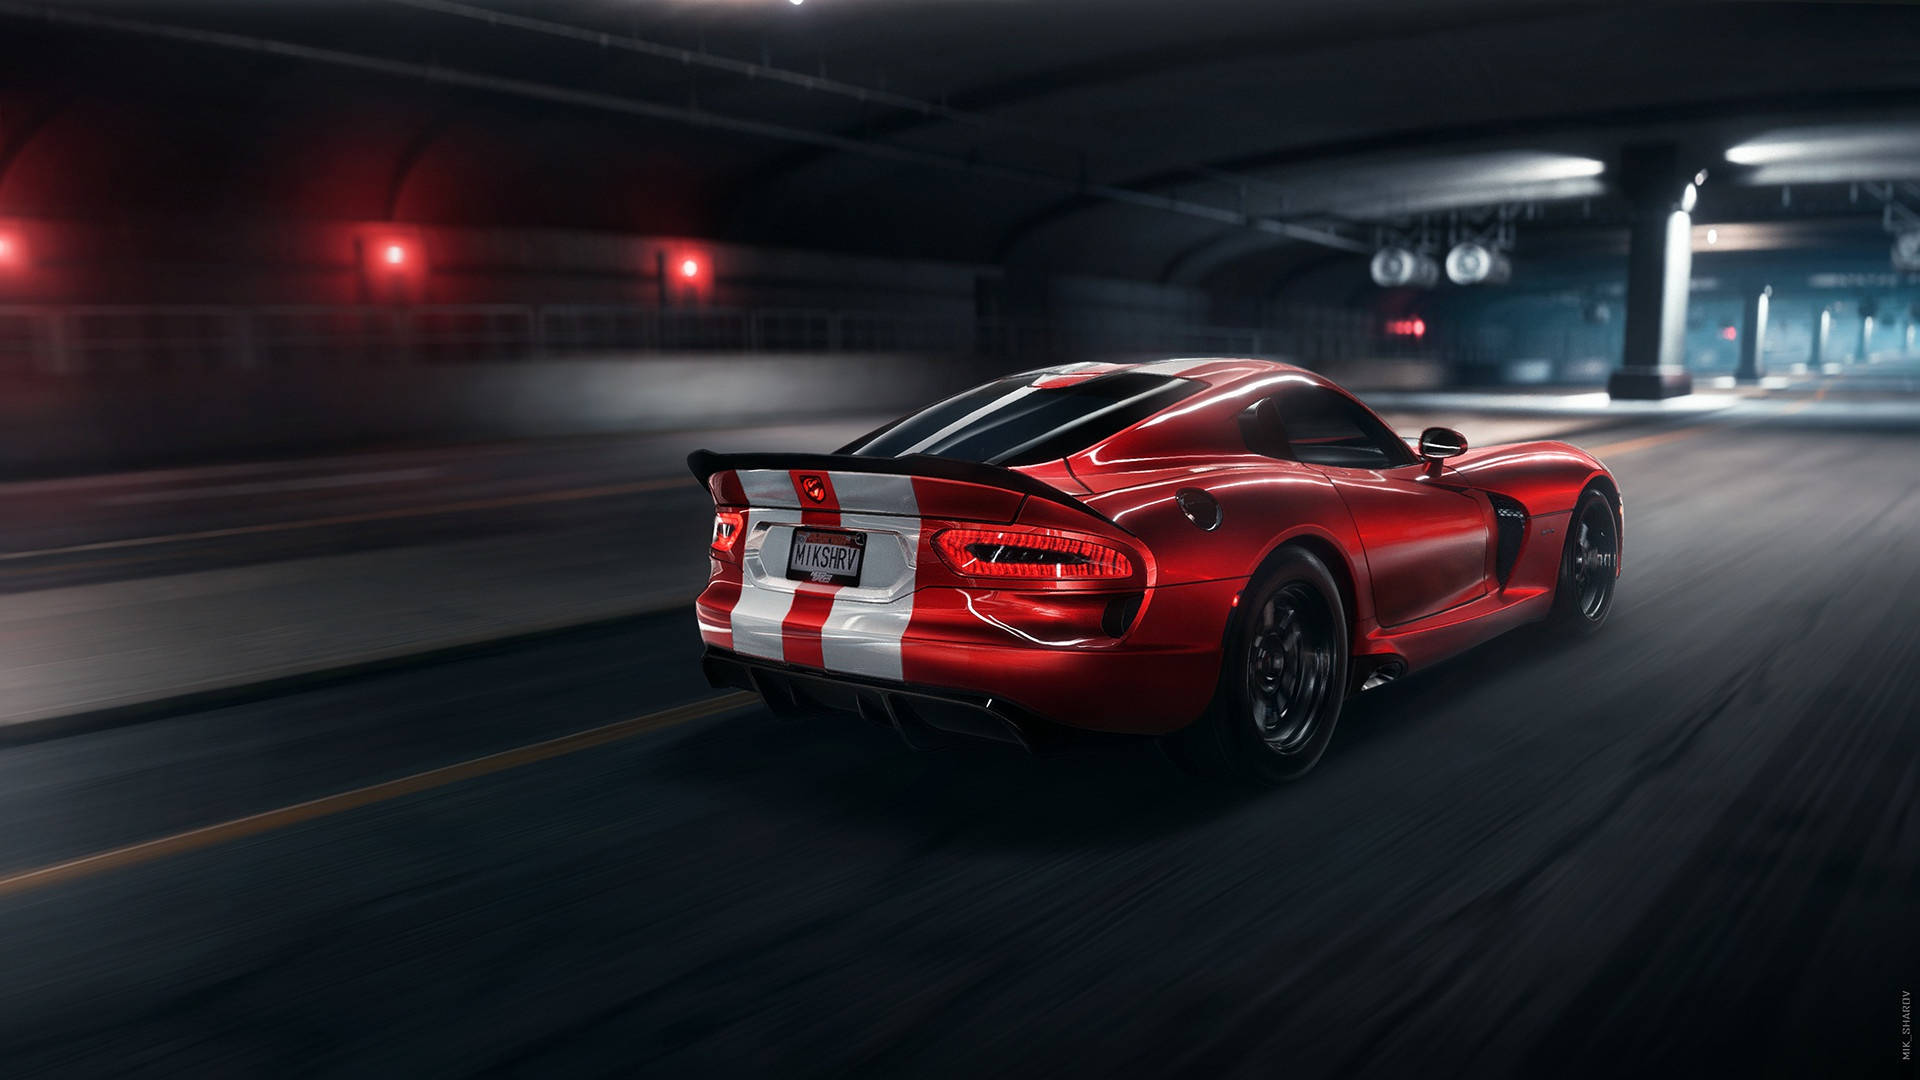 Need For Speed Payback Dodge Viper SRT Wallpaper